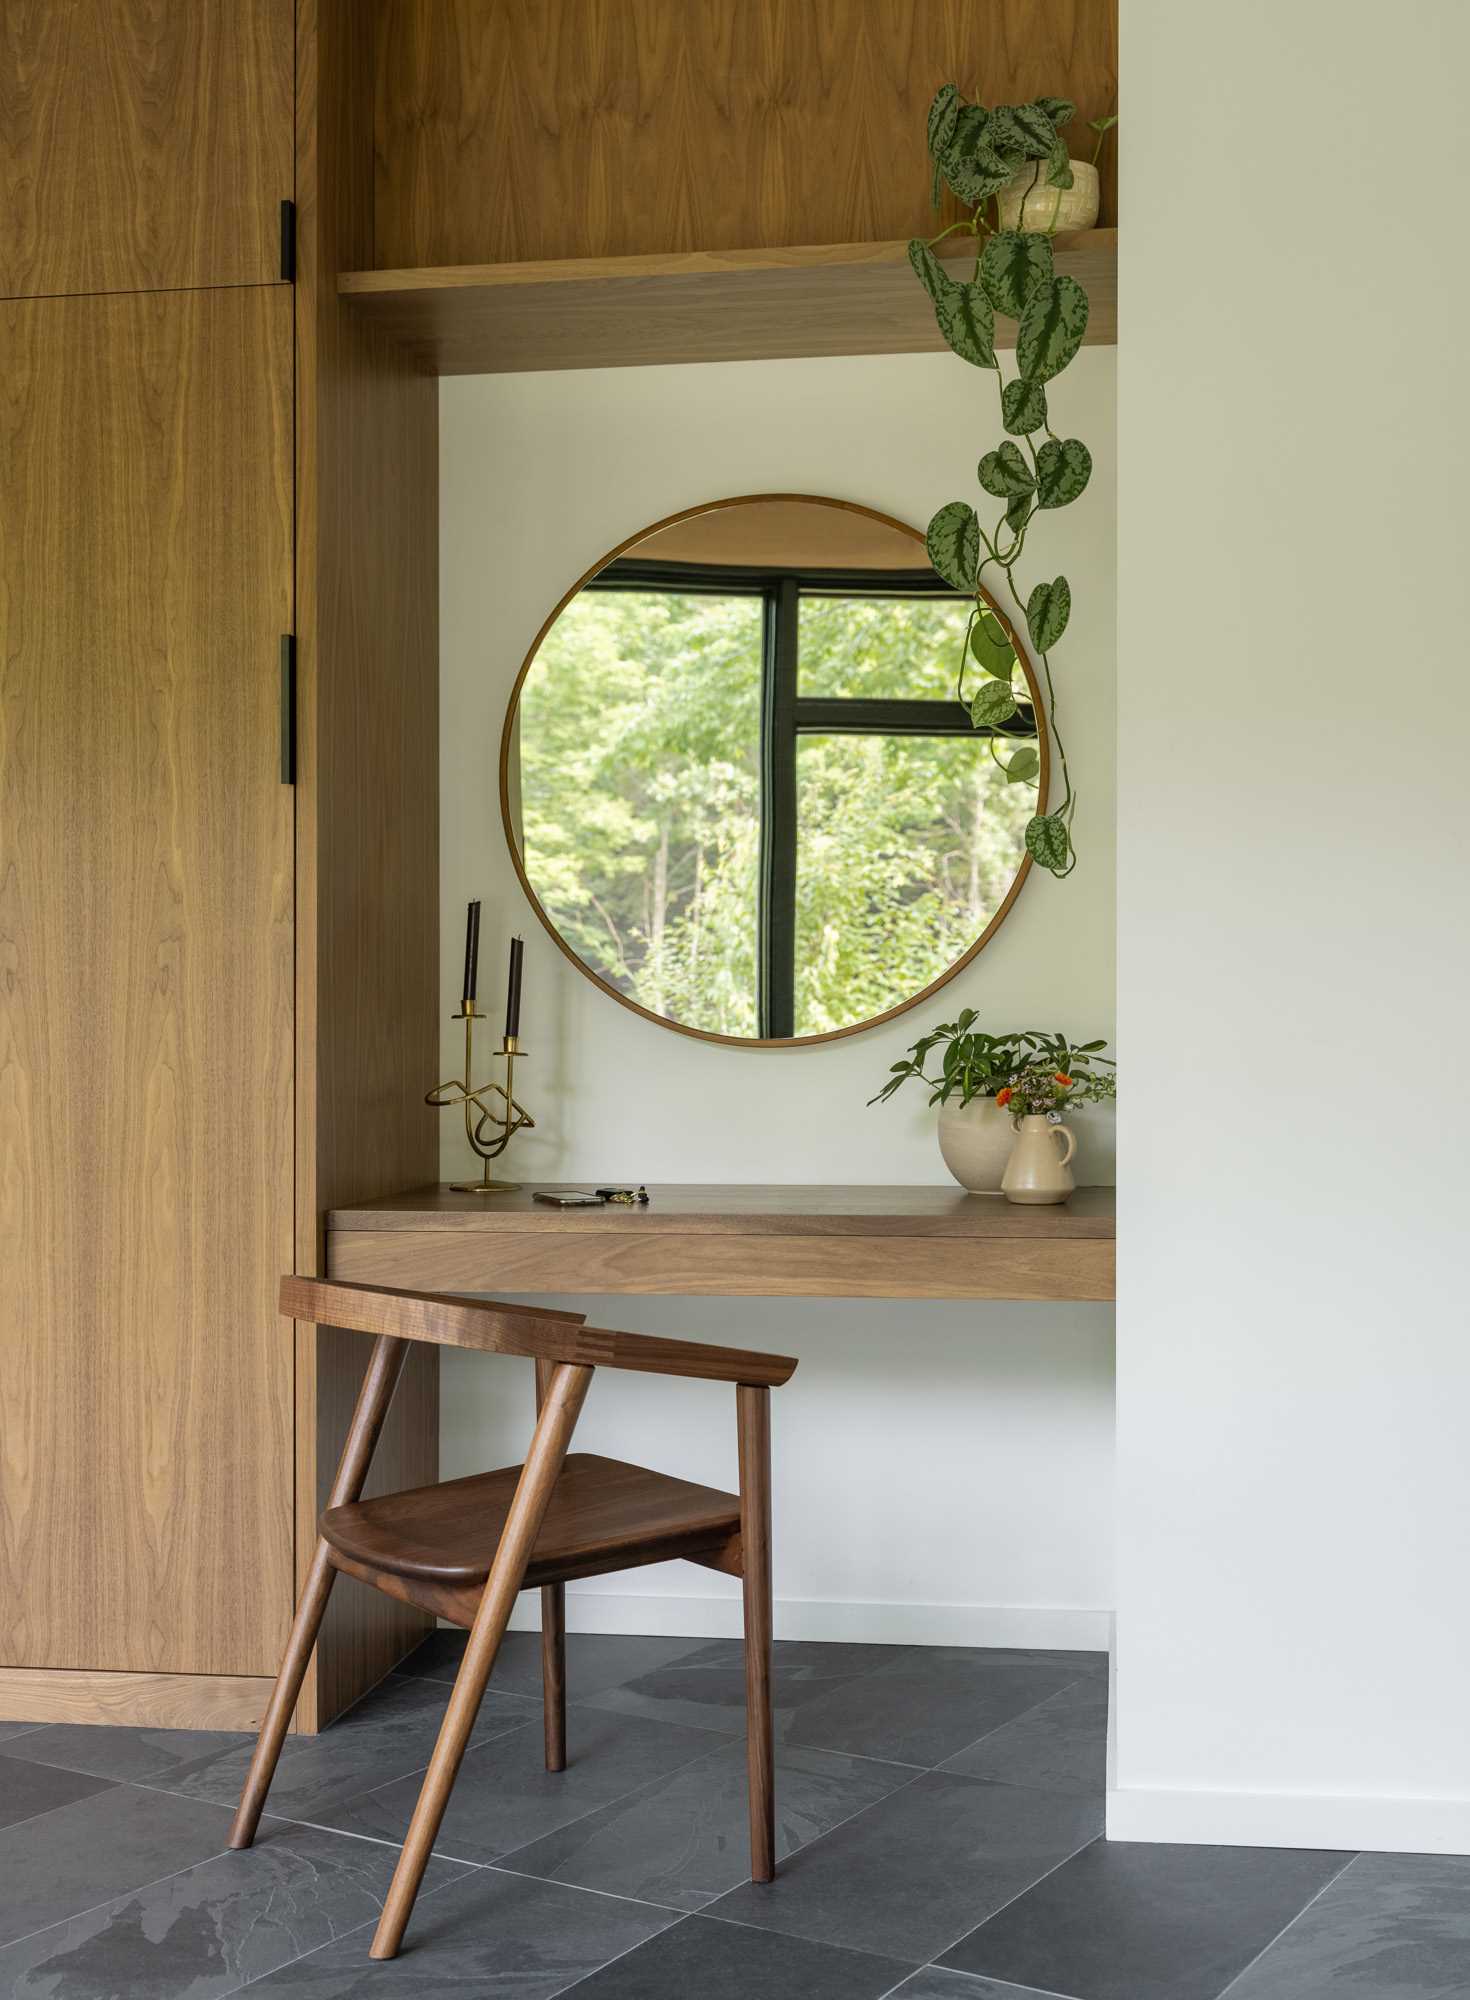 Inside this modern house, the entryway includes a small built-in desk area with a round mirror, and closets.